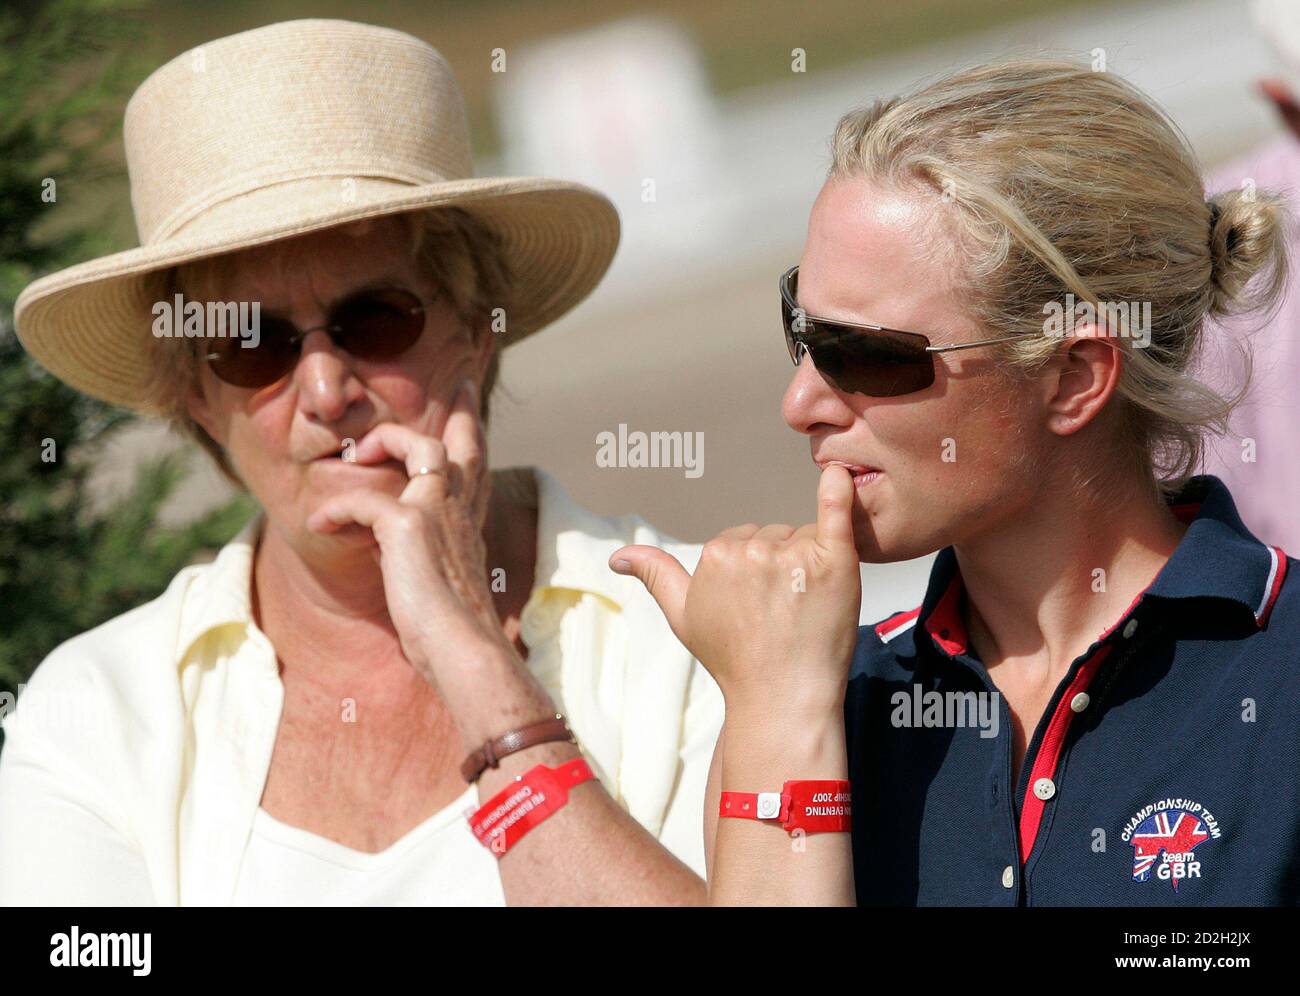 Britain's Zara Phillips (R), granddaughter of Queen Elizabeth II, watches  team mate Rodney Powell compete during the European Equestrian Championship  at the Pratoni Del Vivaro in southern Rome September 14, 2007.  REUTERS/Alessandro